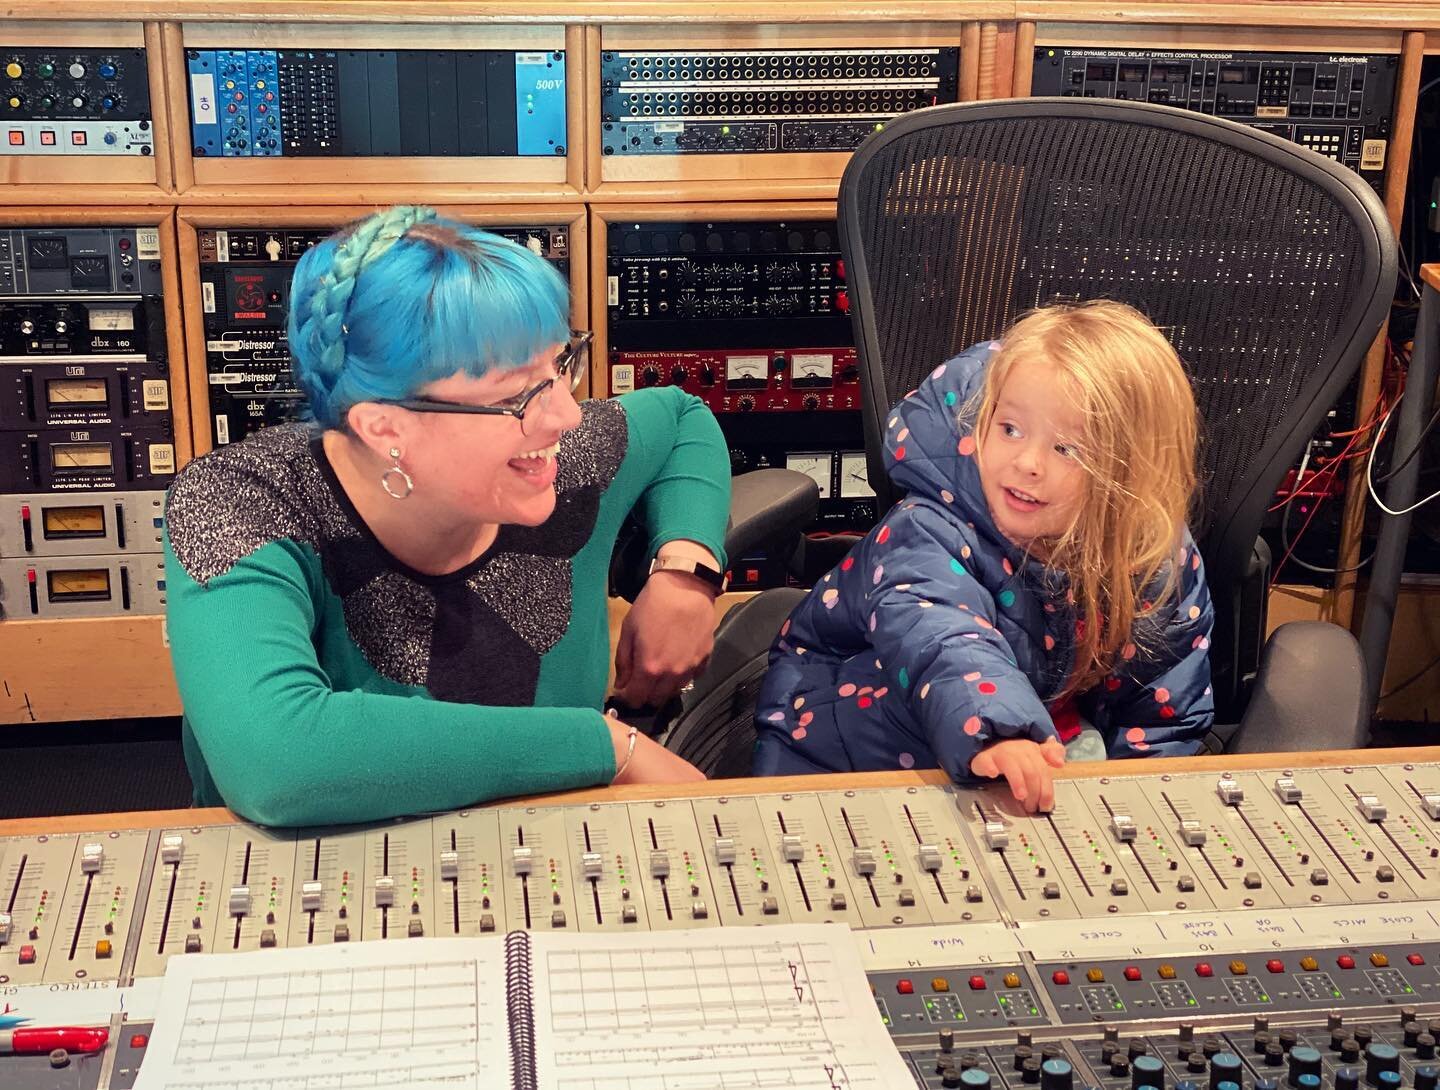 This mini mix consultant had some pretty radical ideas - but she was such a pleasure to work with 💙💚